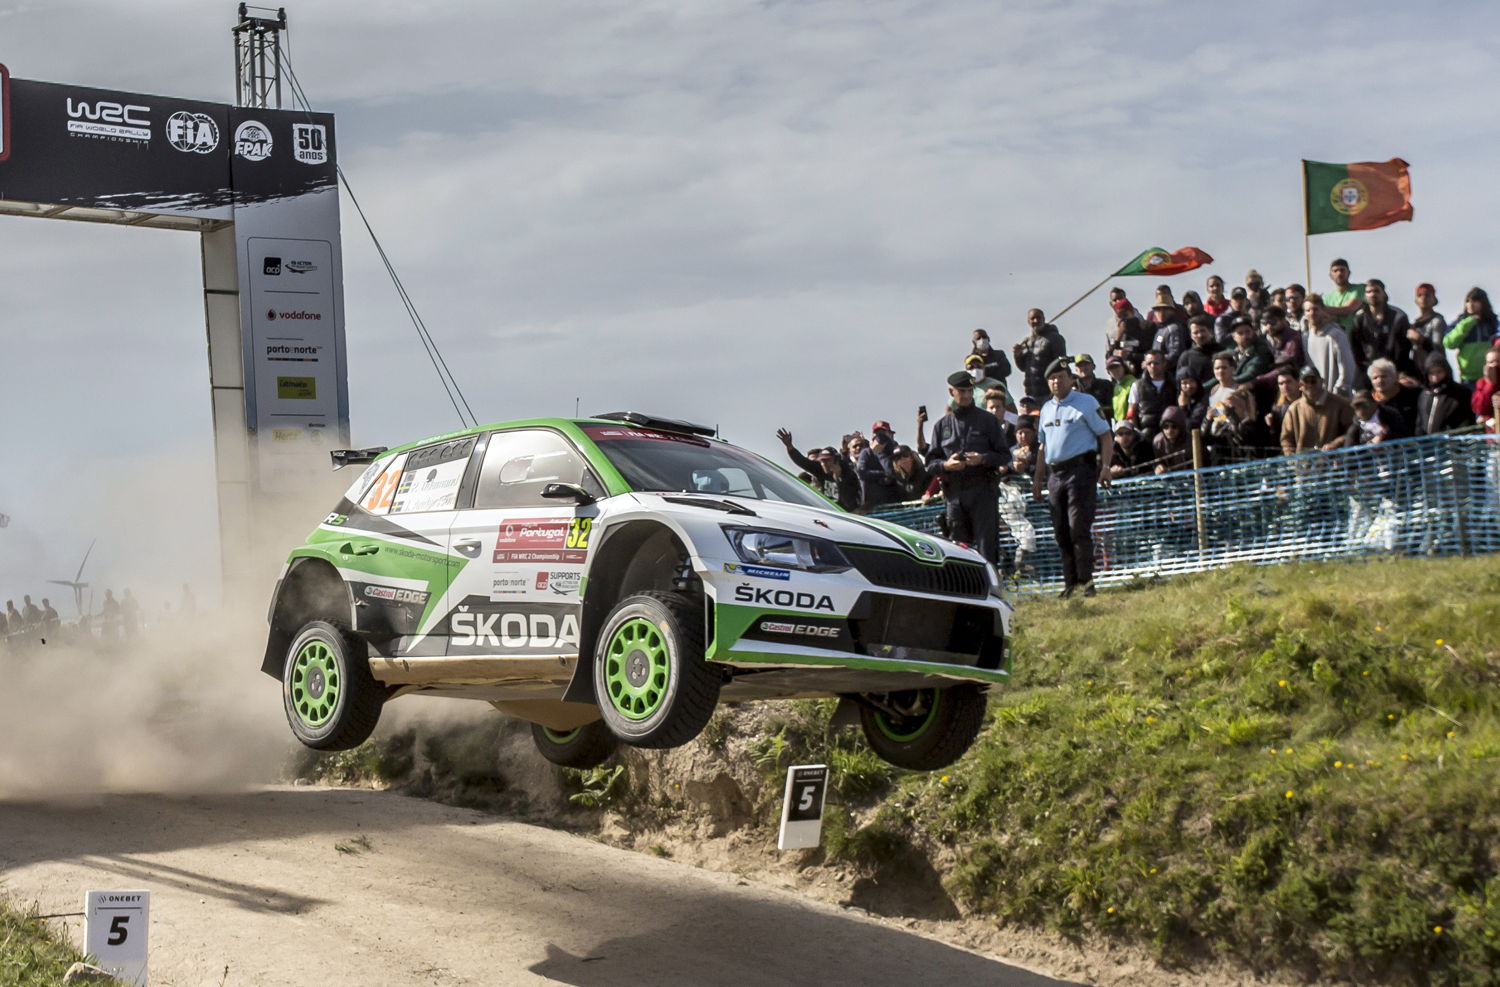 Pontus Tidemand and co-driver Jonas Andersson driving a ŠKODA FABIA R5 took a last minute win in WRC 2 at Rally Portugal 2017